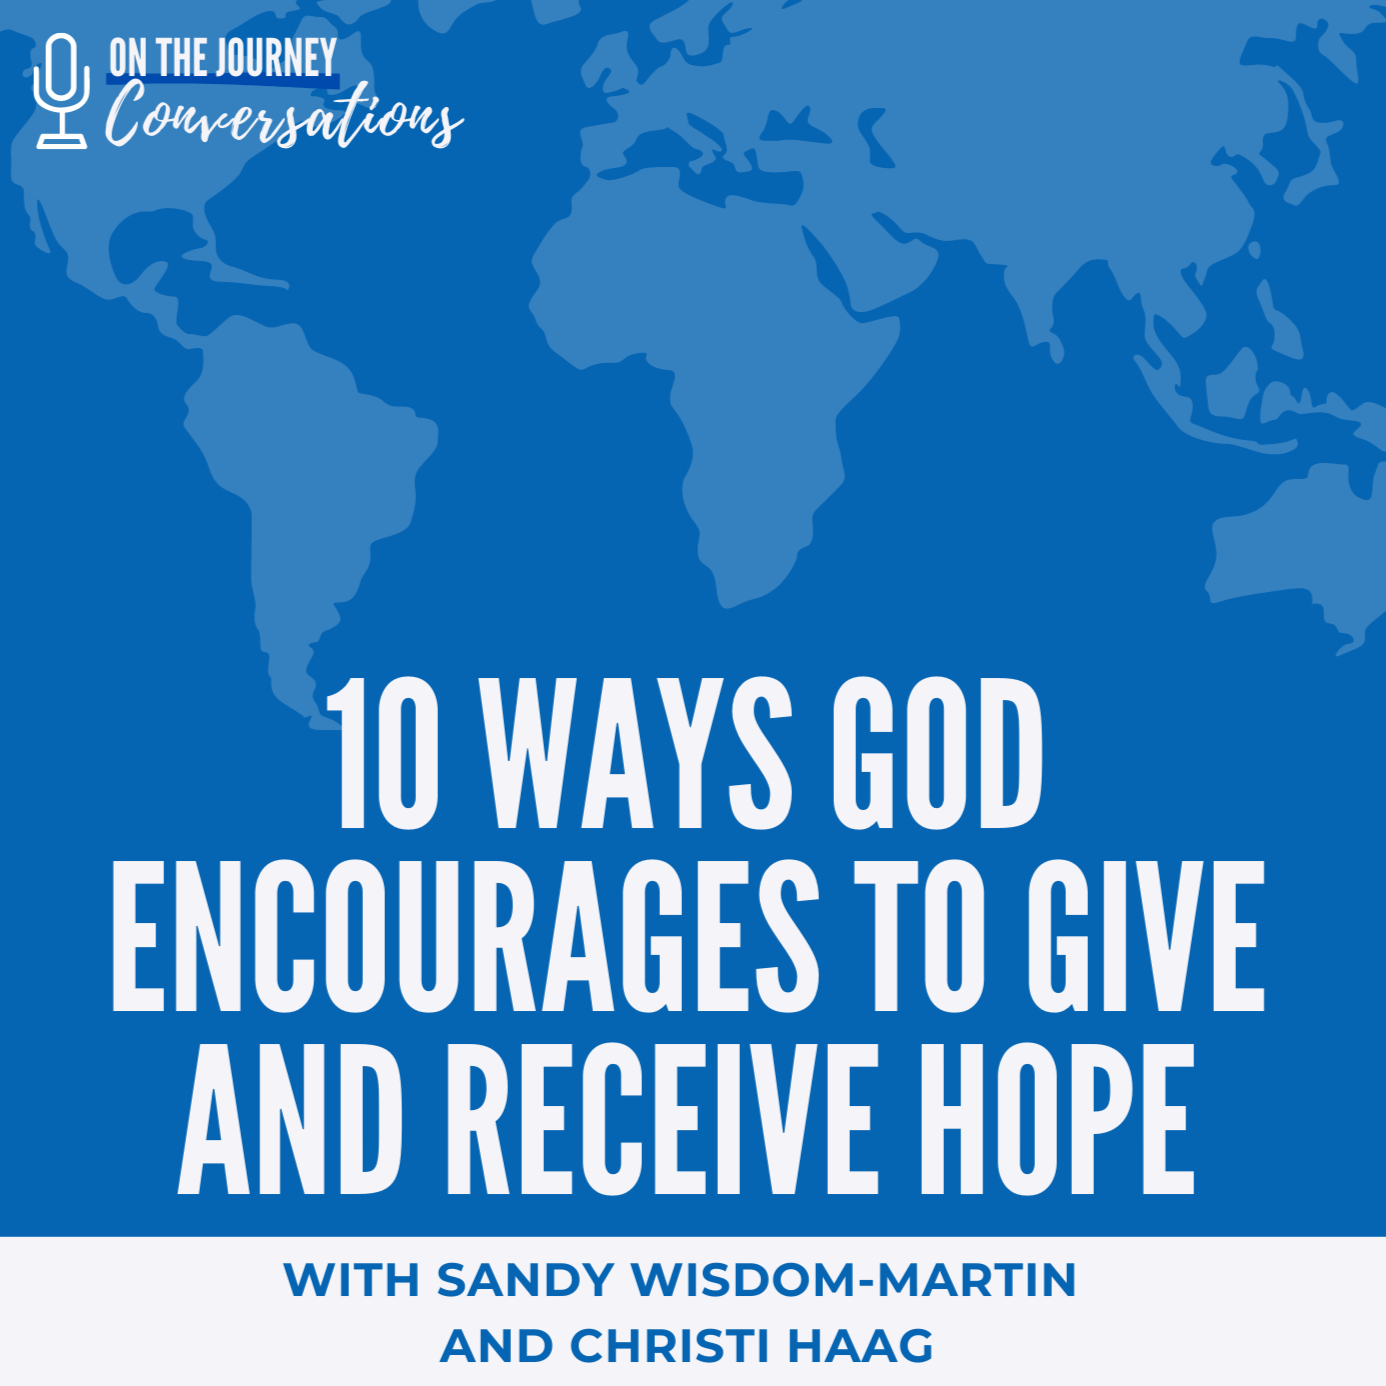 10 Ways God Encourages Us to Give and Receive Hope